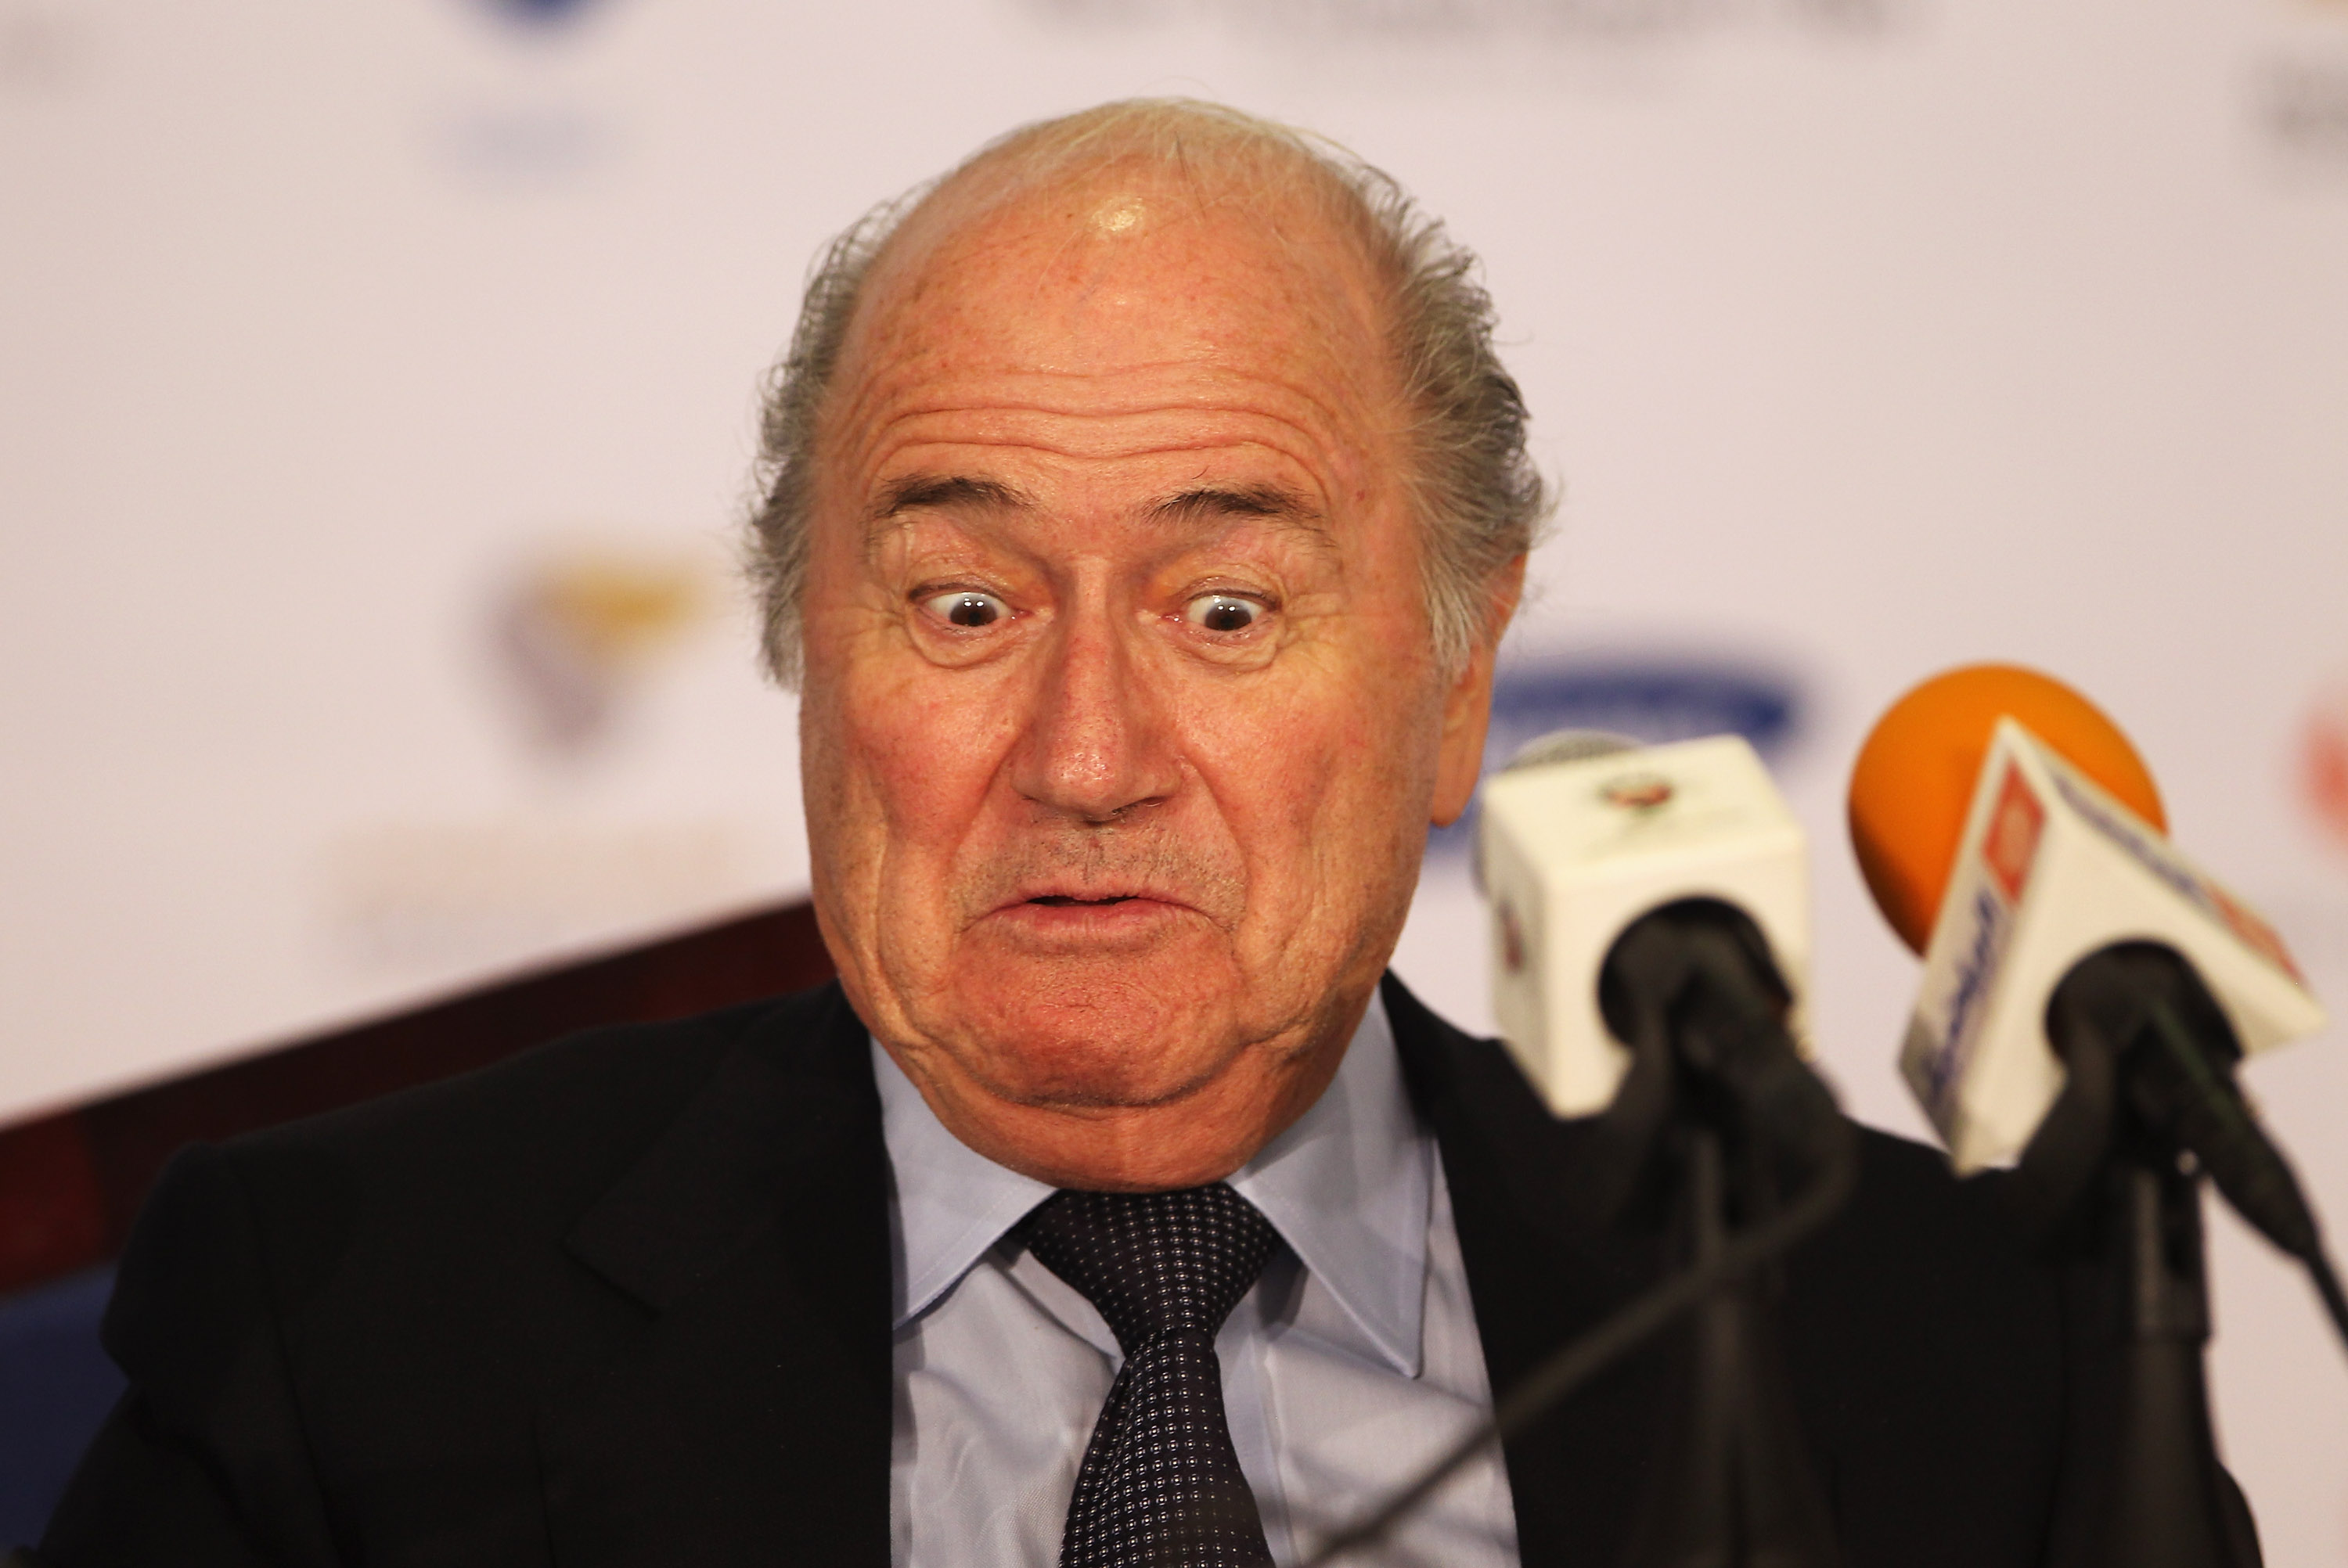 MUSCAT, OMAN - DECEMBER 09:  President of FIFA, Jospeh Sepp Blatter attends a press conference with the Oman Football Association at the Main Press Centre, Al-Musannah Sports City on December 9, 2010 in Muscat, Oman.  (Photo by Bryn Lennon/Getty Images)